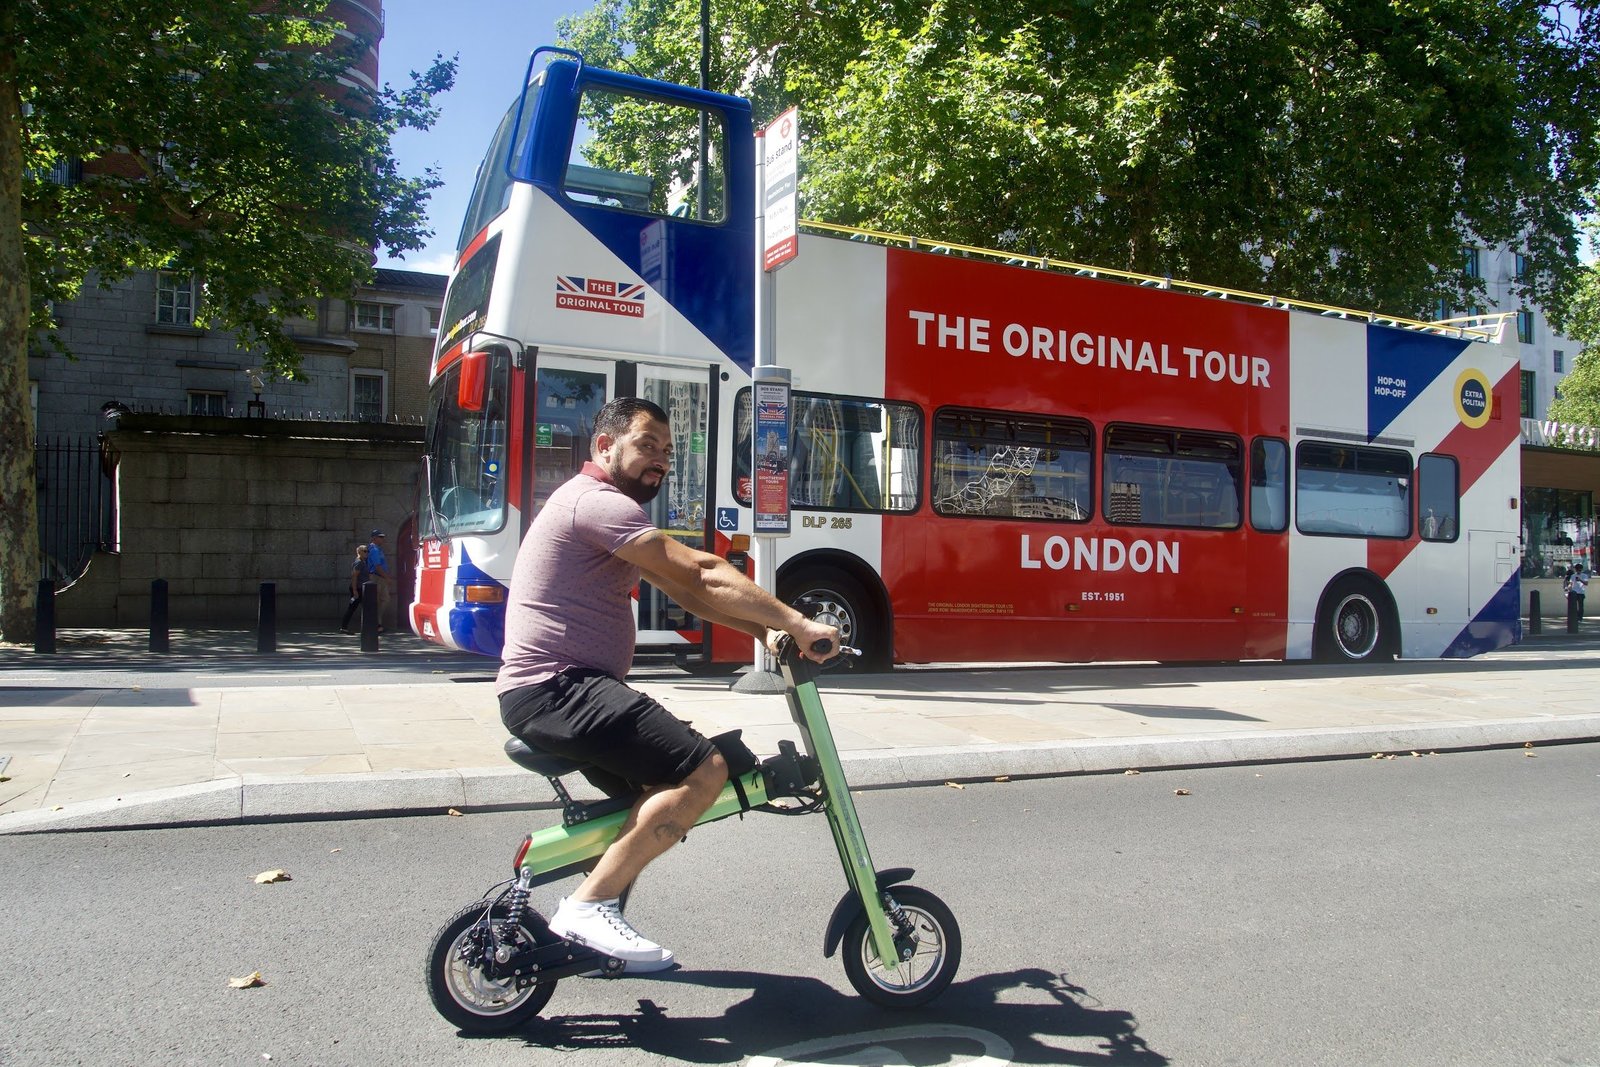 Man cruising the streets of London with UK bus in the background